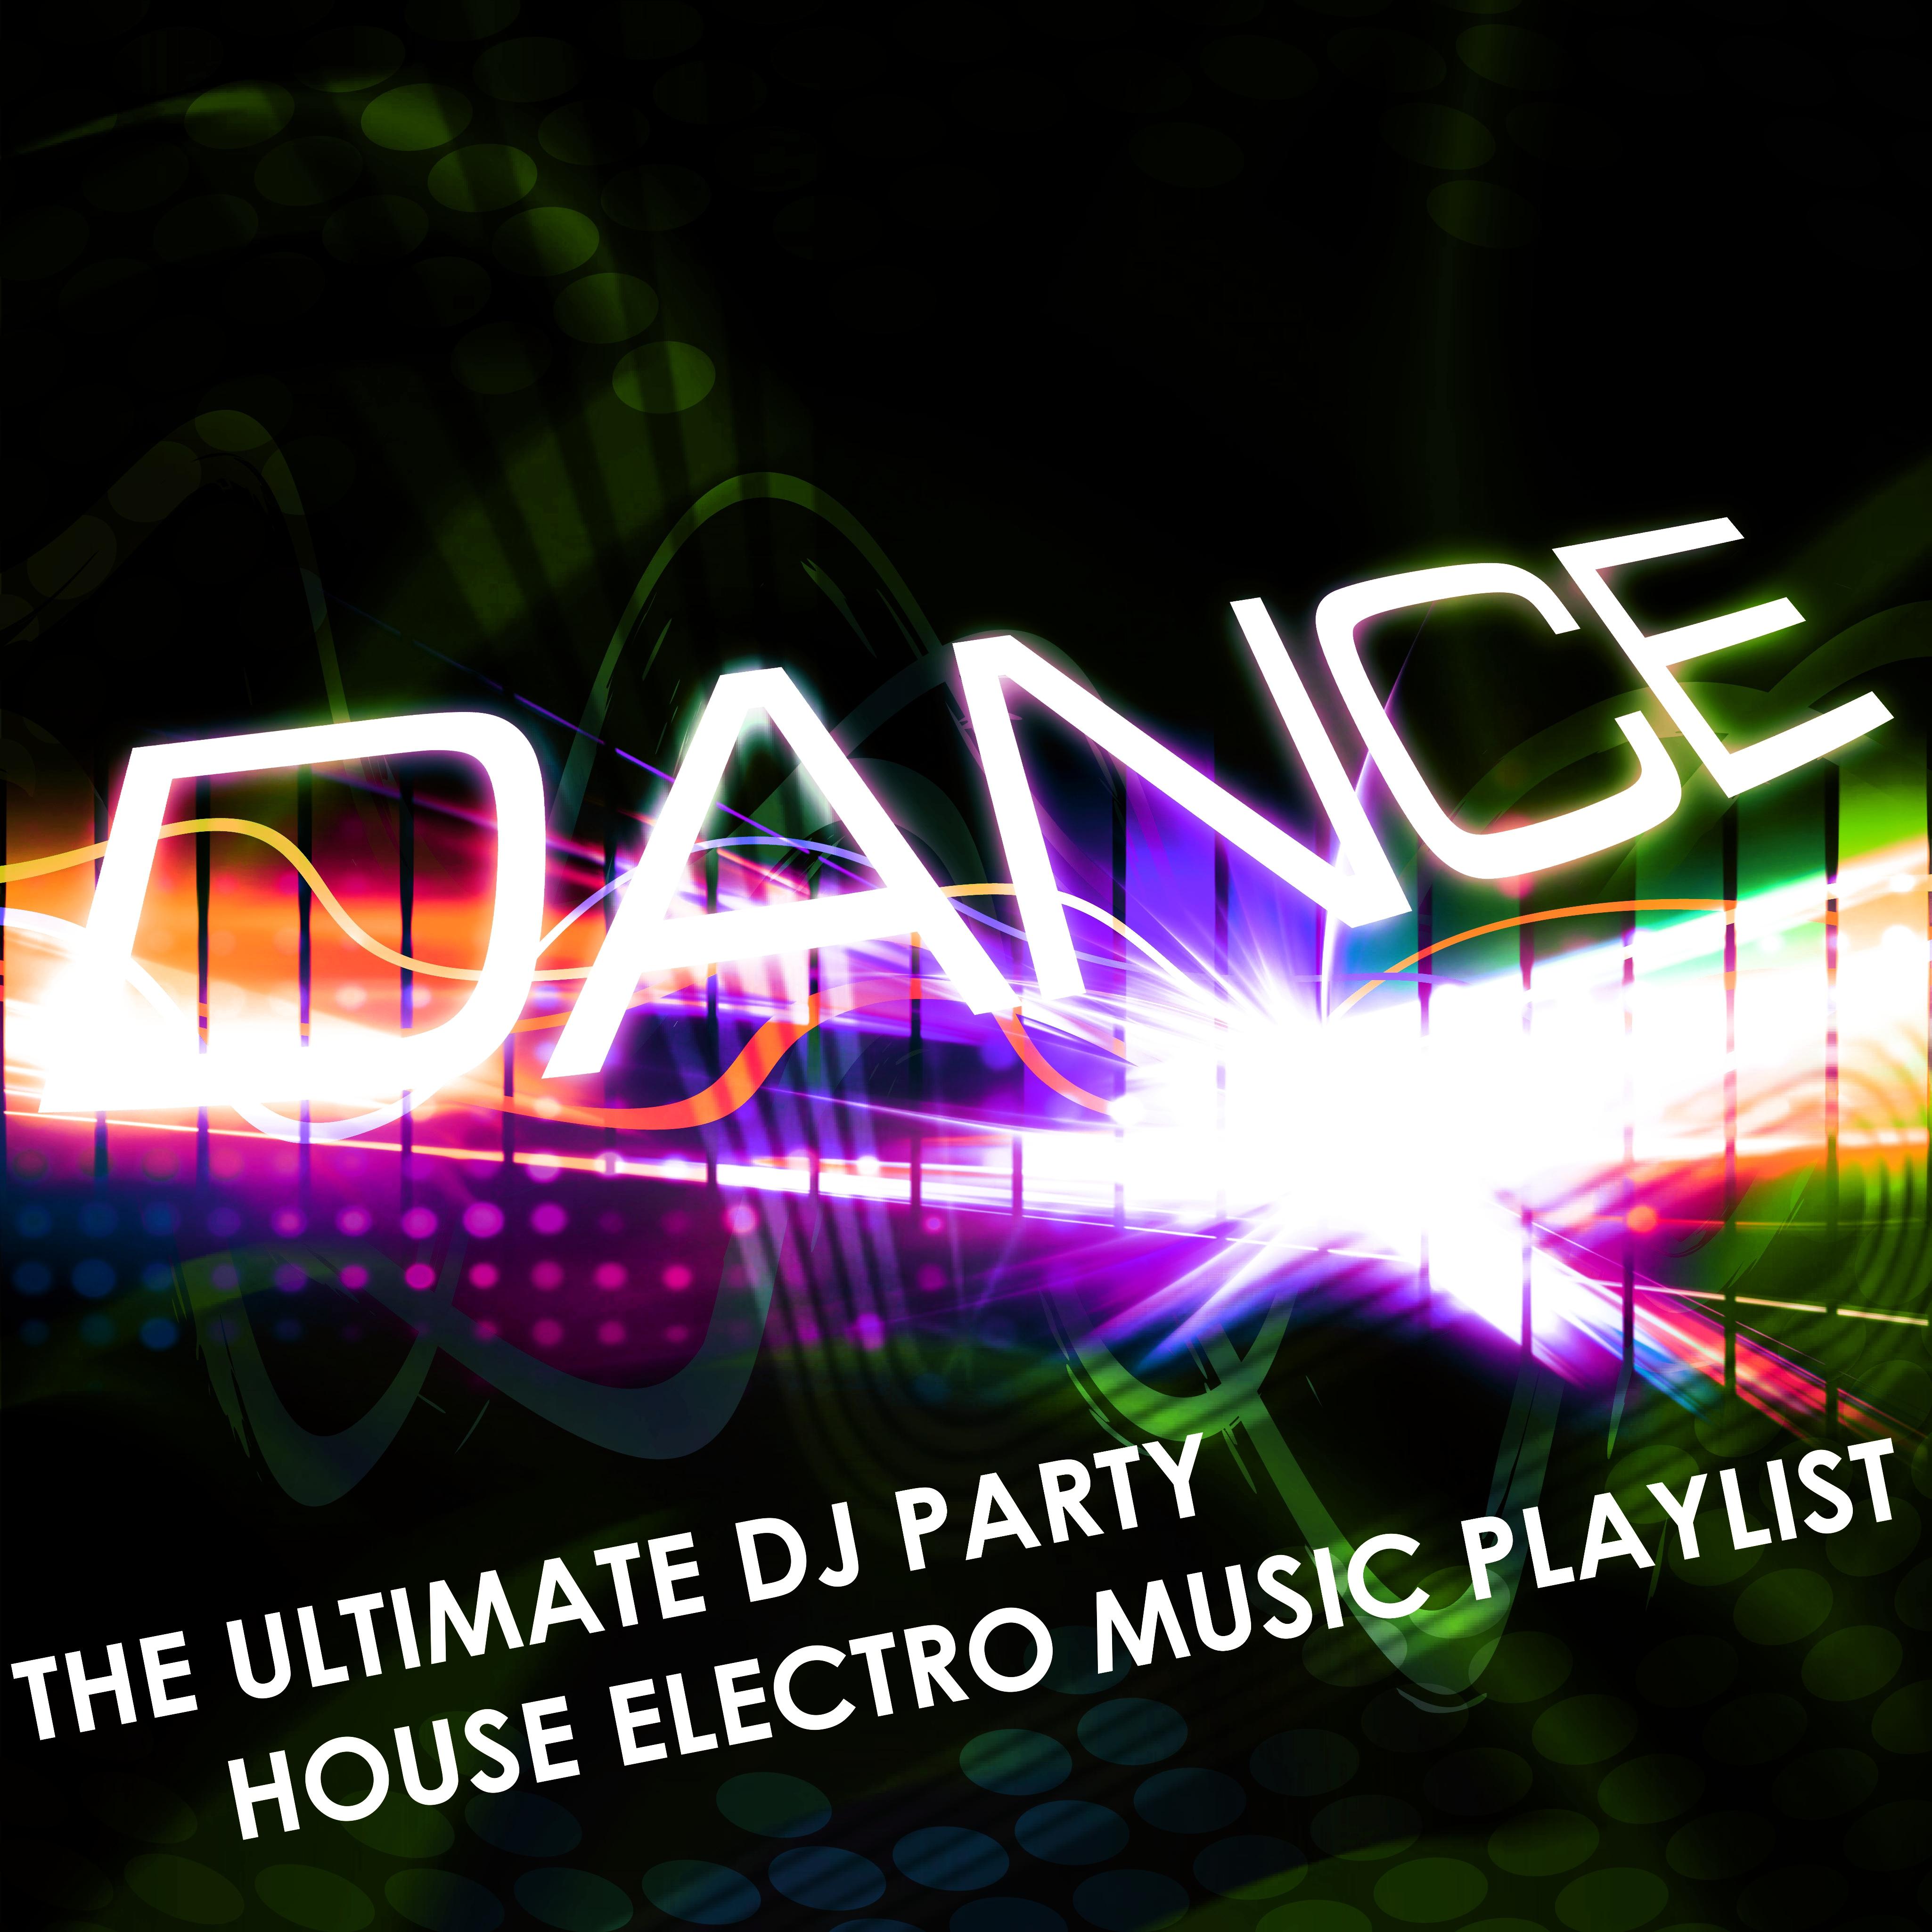 Dance: The Ultimate Dj Party House Electro Music Playlist